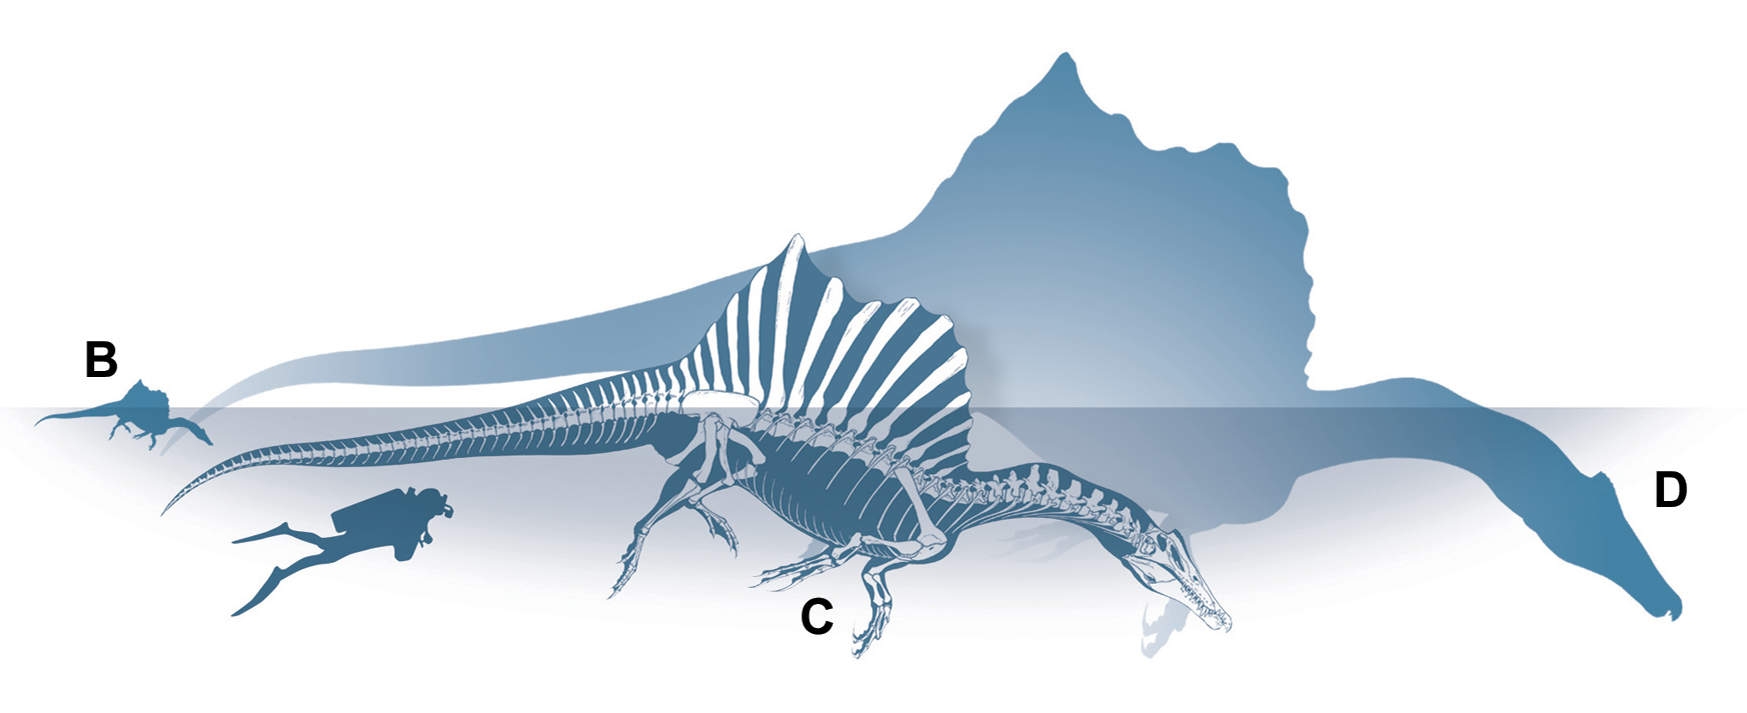 Size-comparison of selected Spinosaurus individuals from the Kem Kem Beds compared to a human. Figure 3 from Maganuco S. and Dal Sasso C. 2018